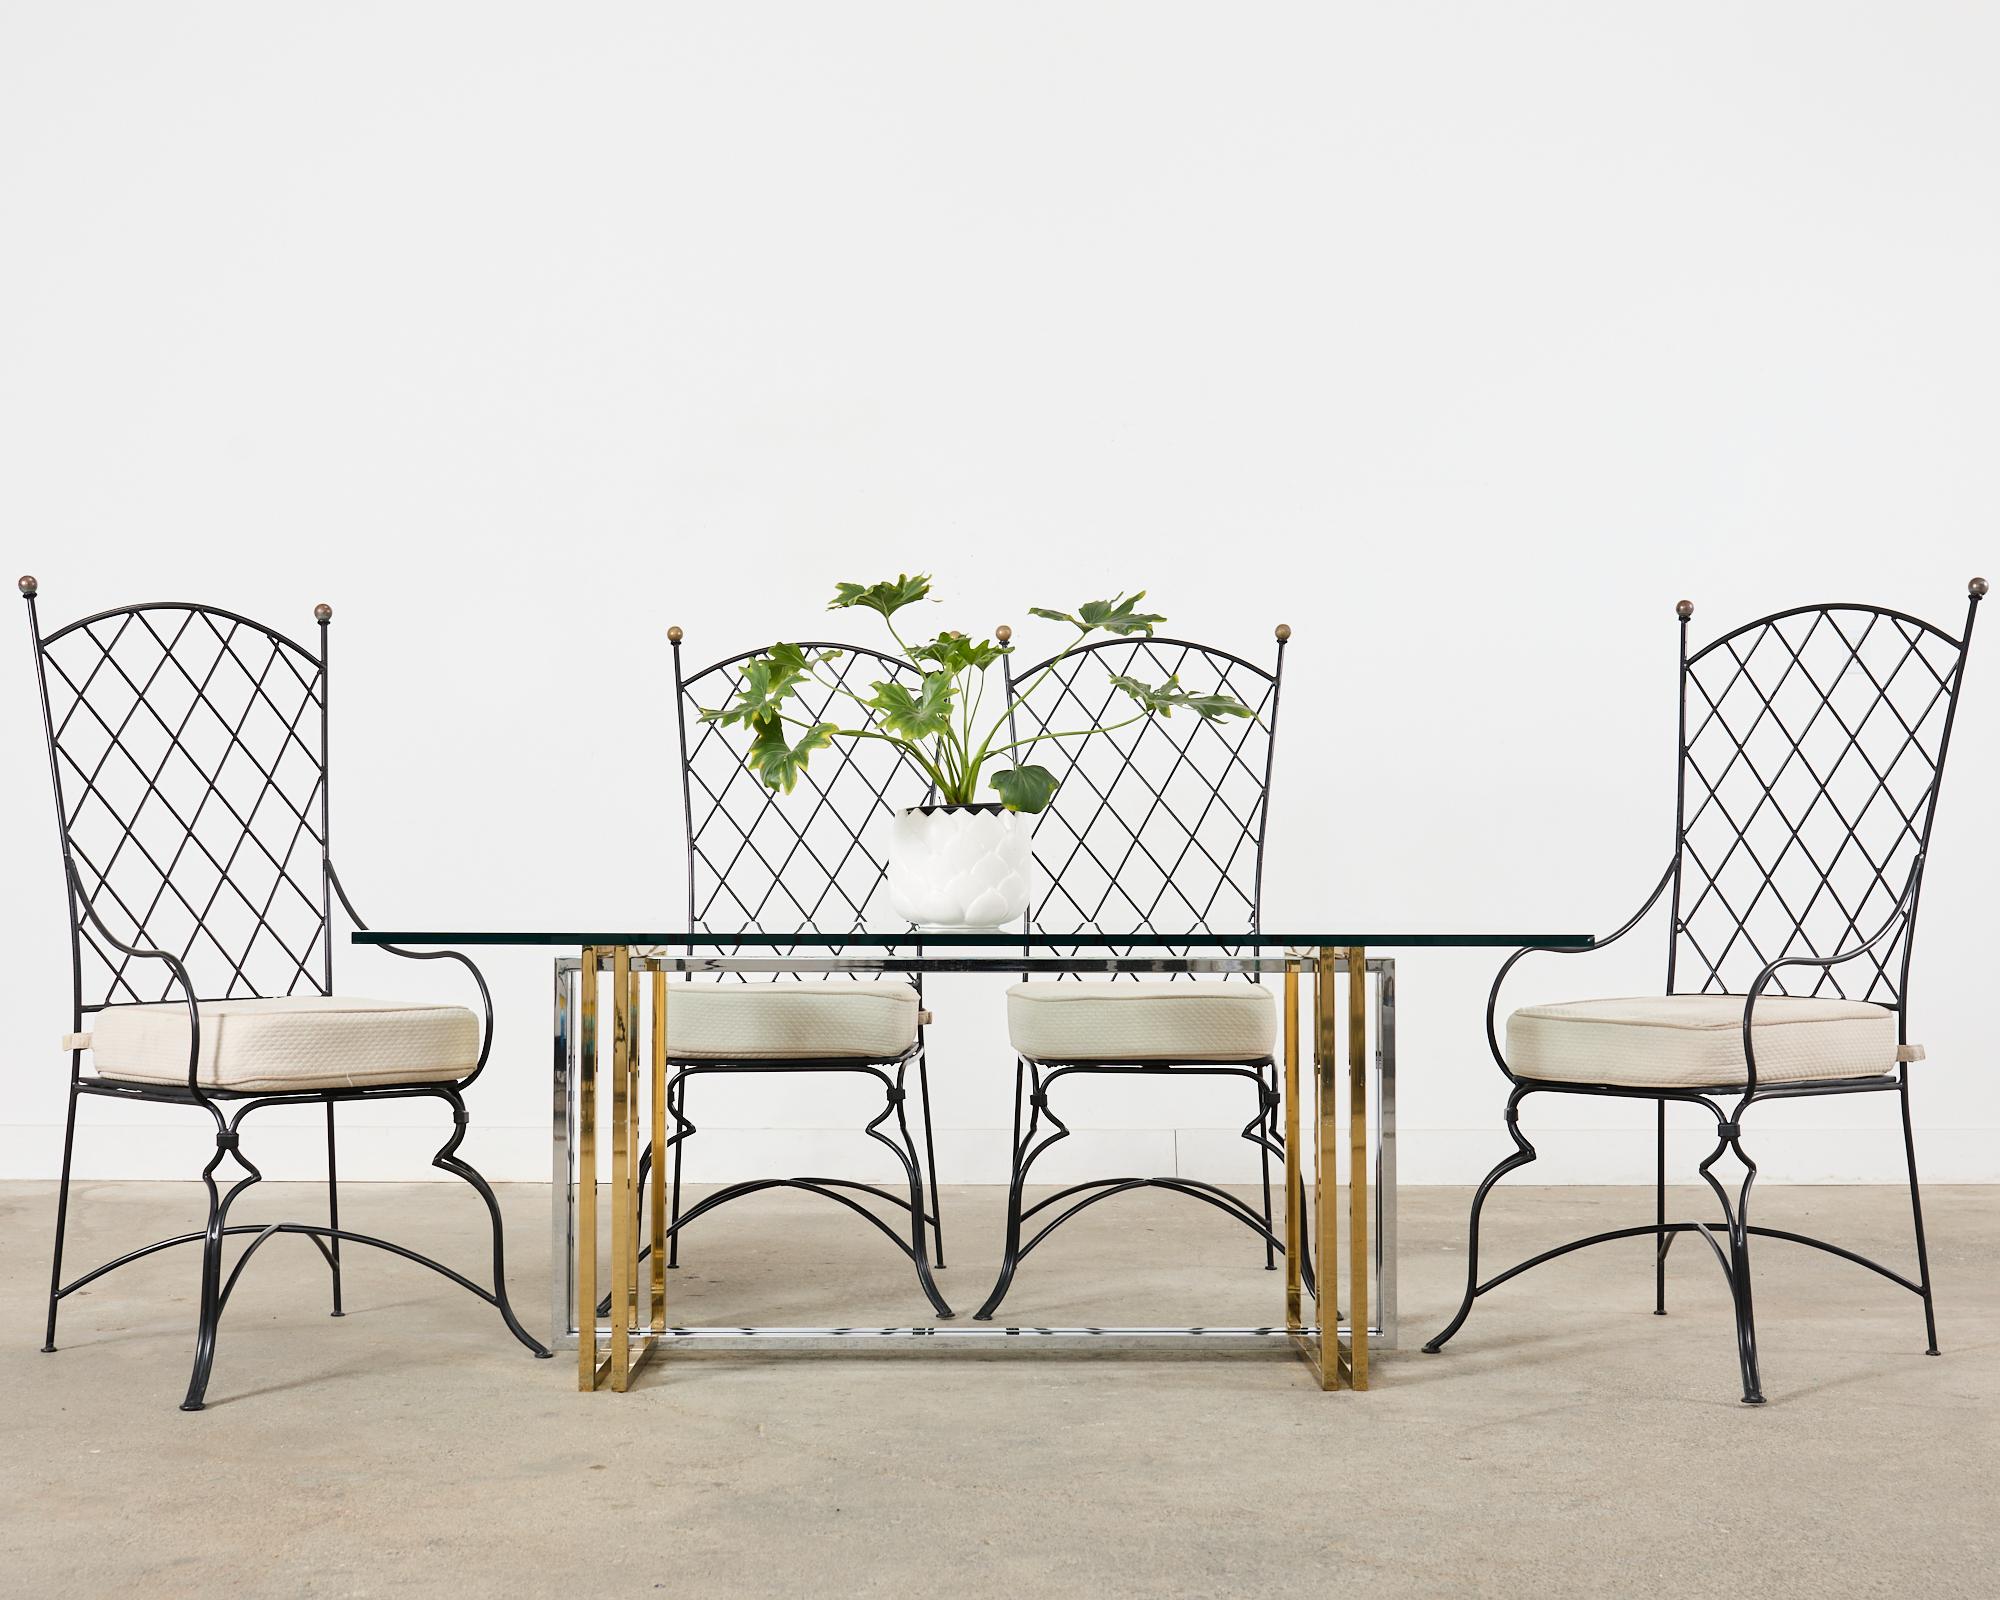 Stunning 20th century Hollywood Regency Italian dining table made in the style and manner of Romeo Rega. The table features a square tube steel frame in square and rectangular shapes. The brass finished square legs support the thick pane of glass.